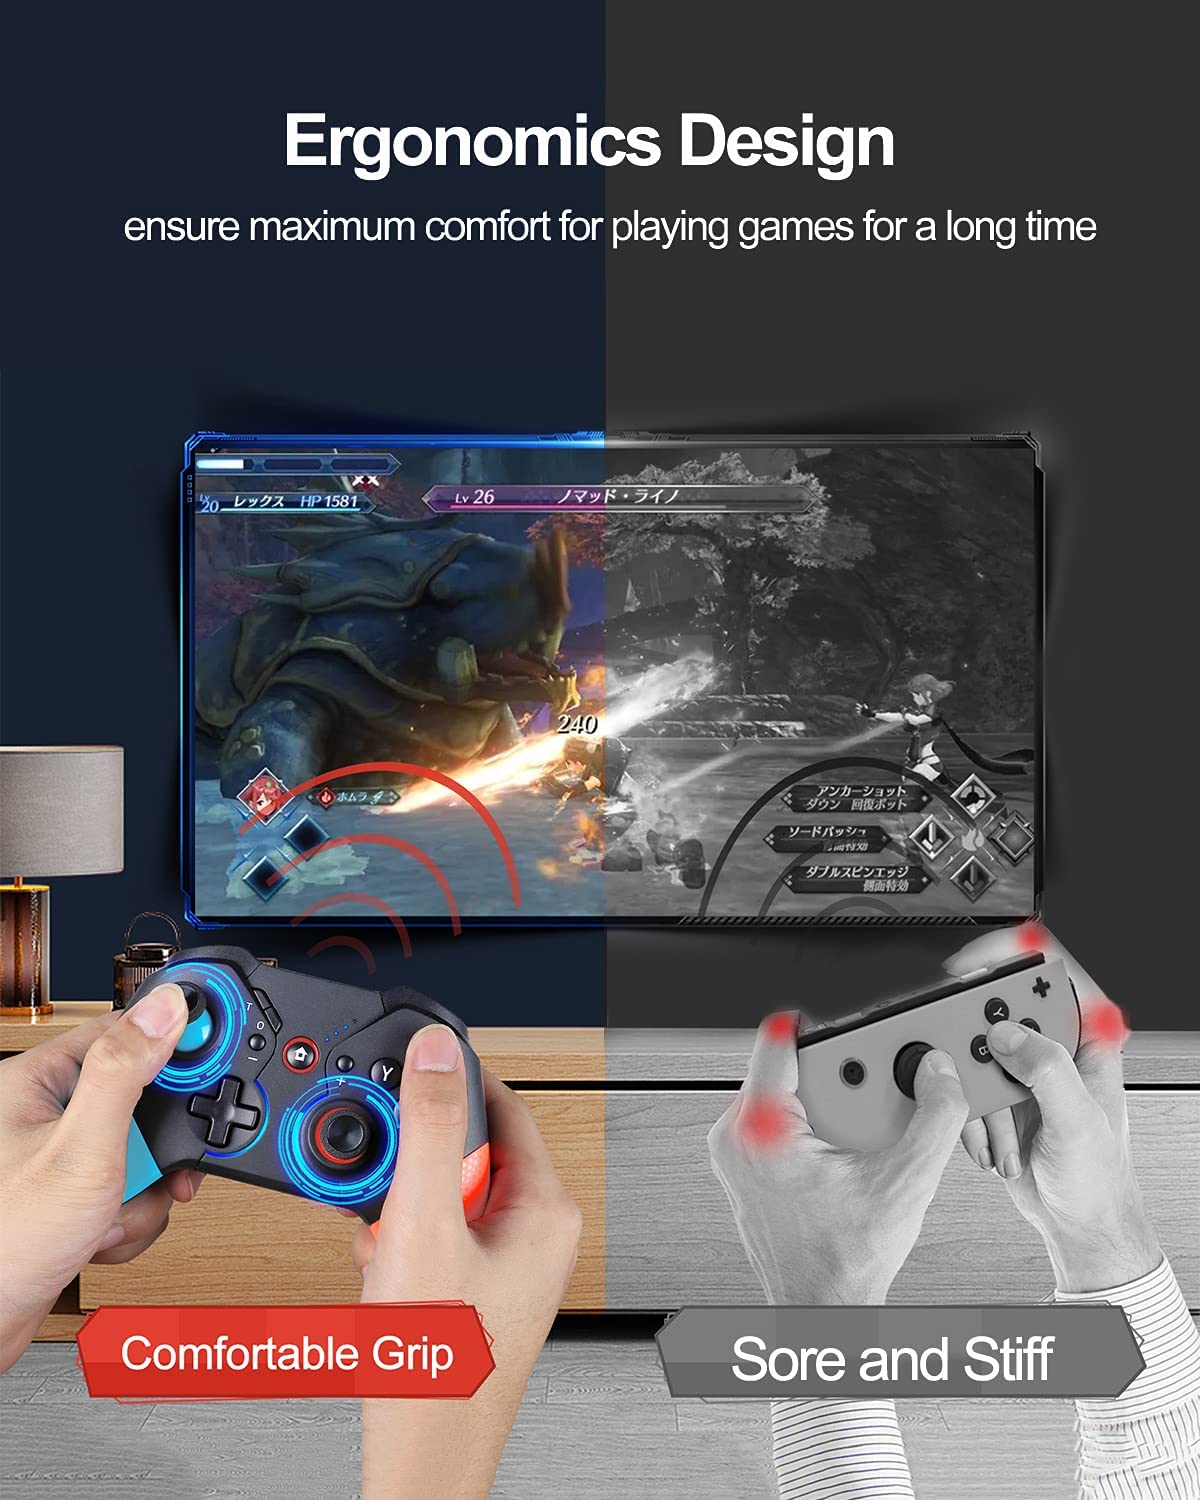 ISENPENK Switch Controller for Nintendo with Wake Up, Bluetooth Gamepad Remote Grip with Macro Motion Vibration Turbo RGB Light, Wireless Pro Controller Joy Con Switch for Kids Gifts - Blue&Red